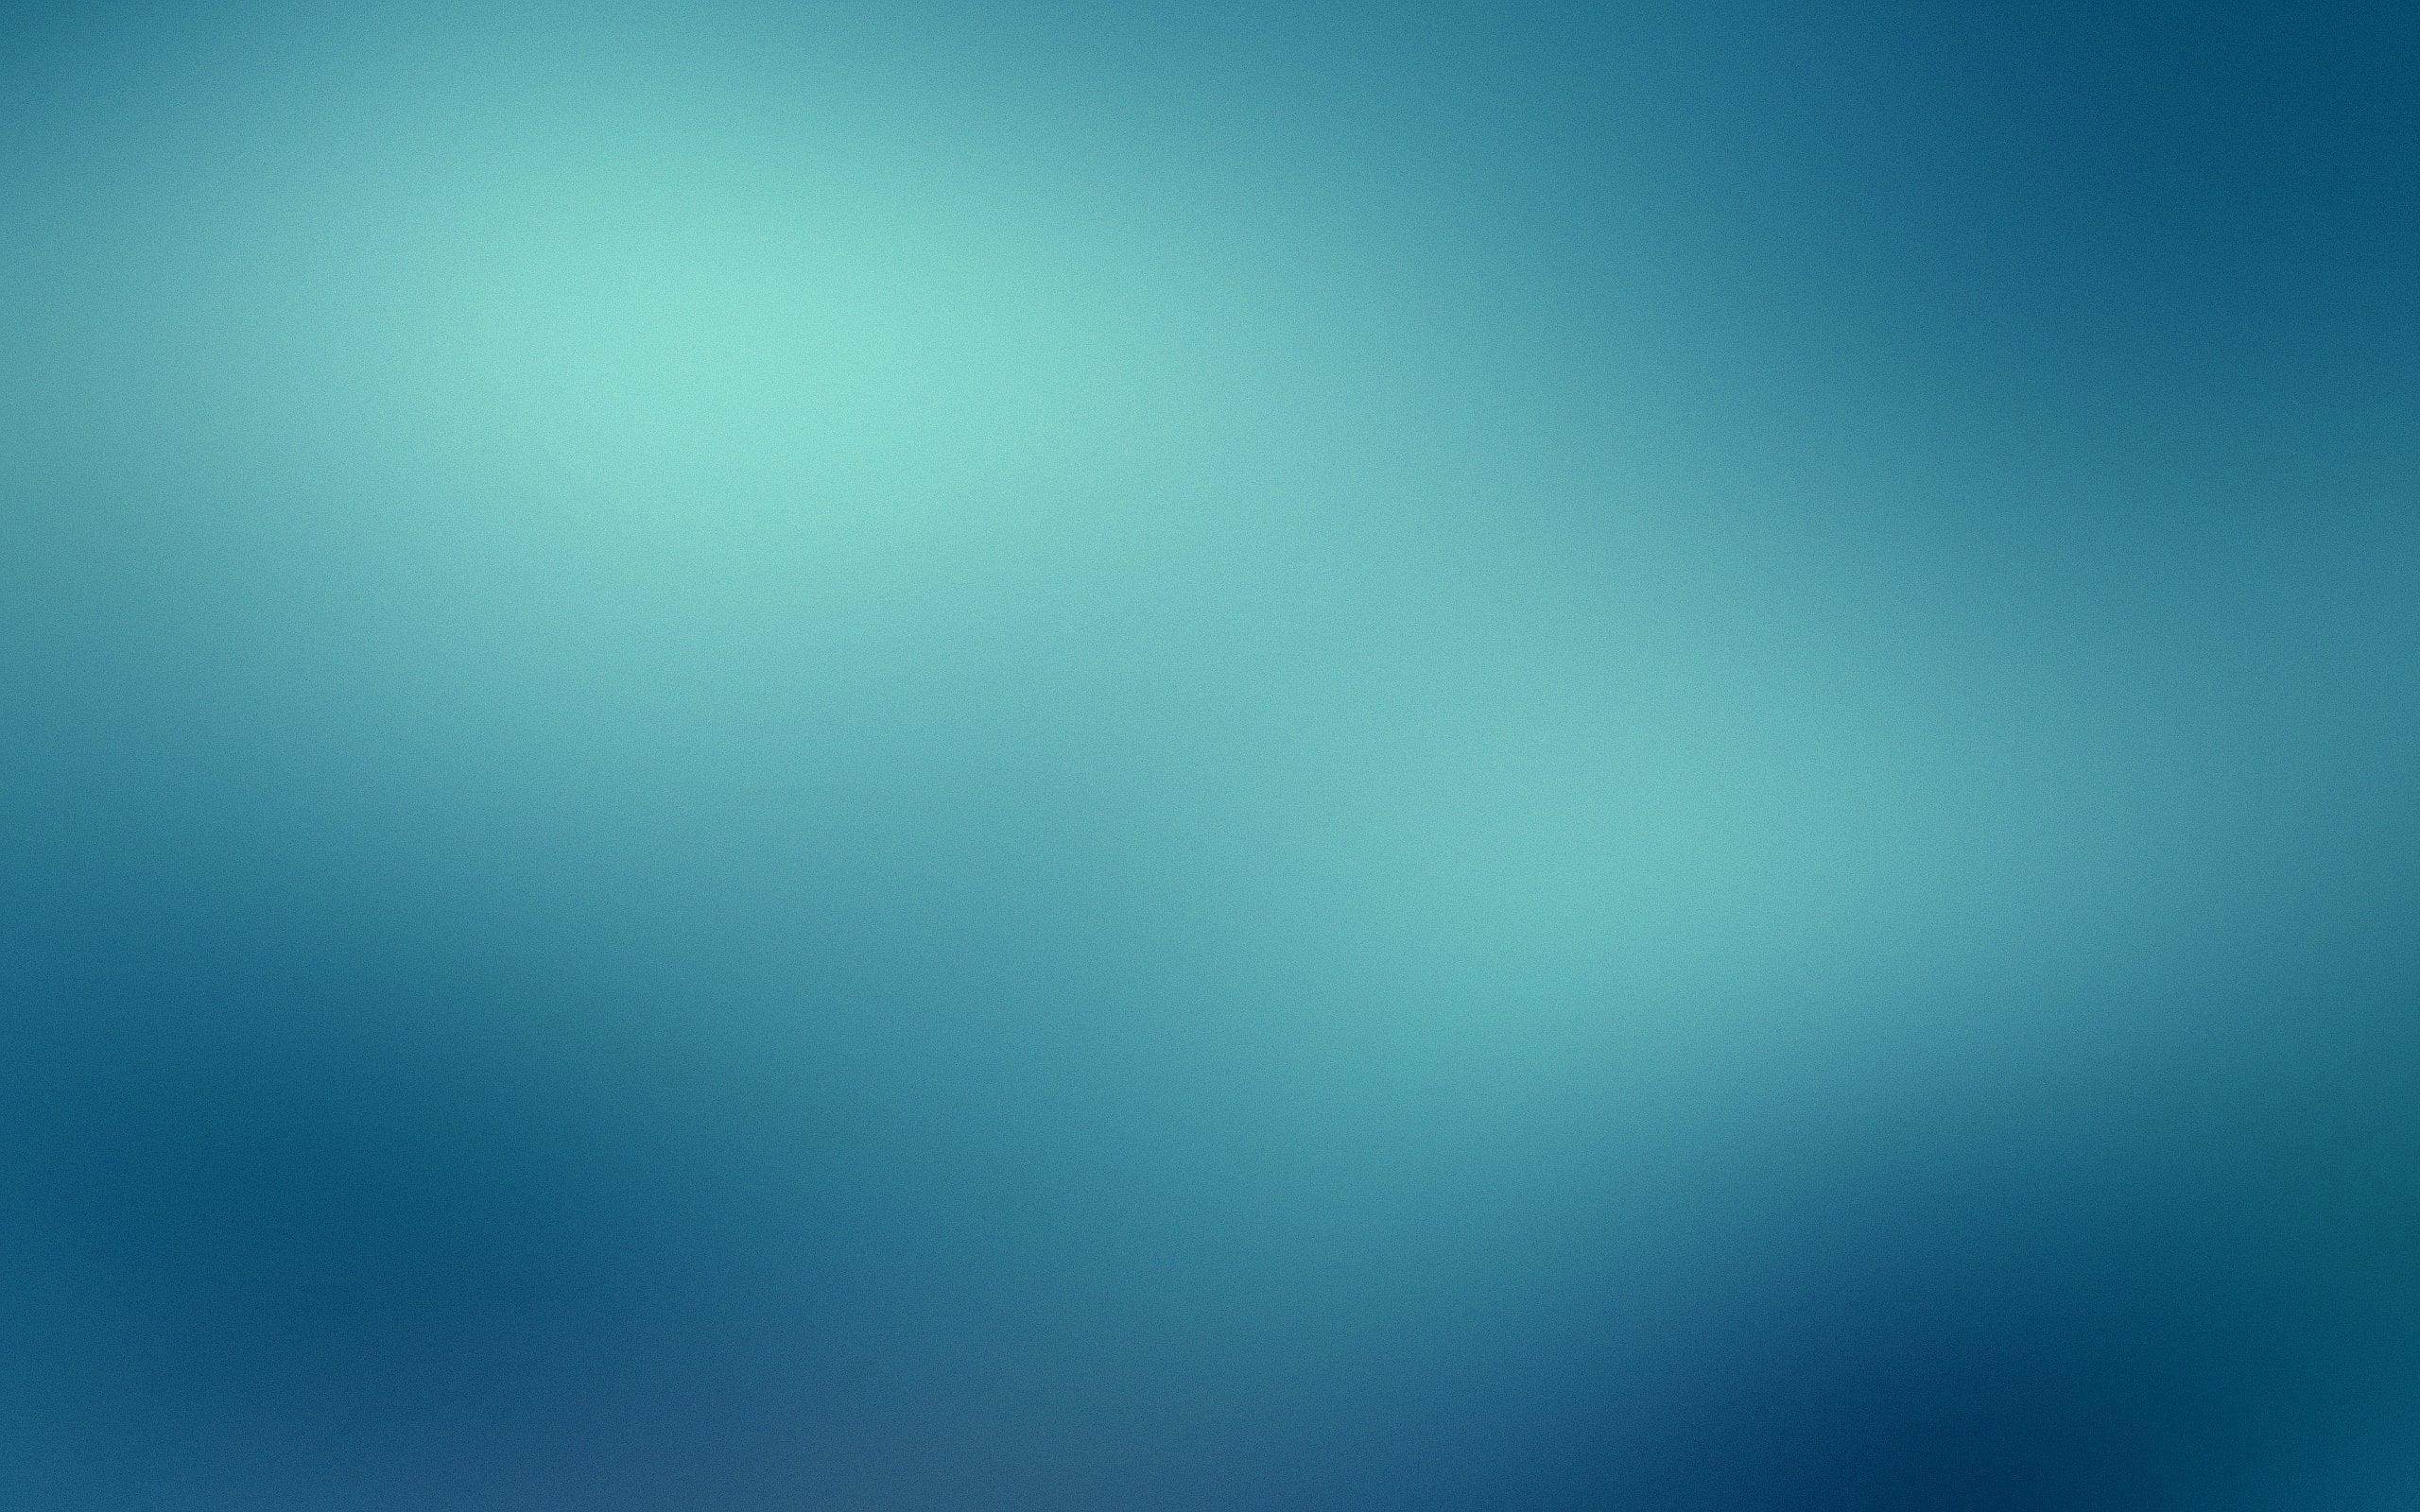 teal and blue wallpaper, background, light, dark, surface, backgrounds